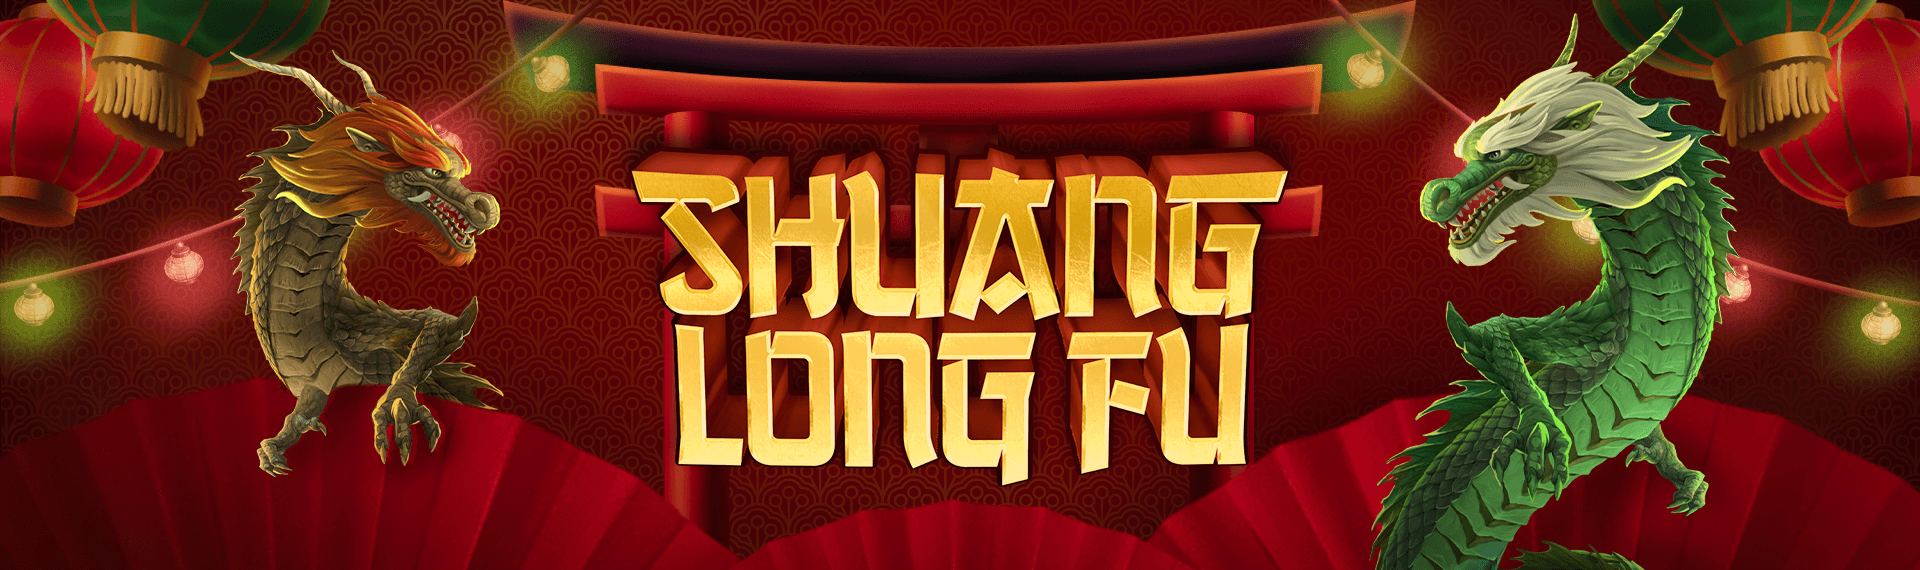 Shuang Long Fu Screenshot <br />
<b>Notice</b>:  Undefined variable: key in <b>/var/www/html/wp-content/themes/armadillo/page-game.php</b> on line <b>37</b><br />
1